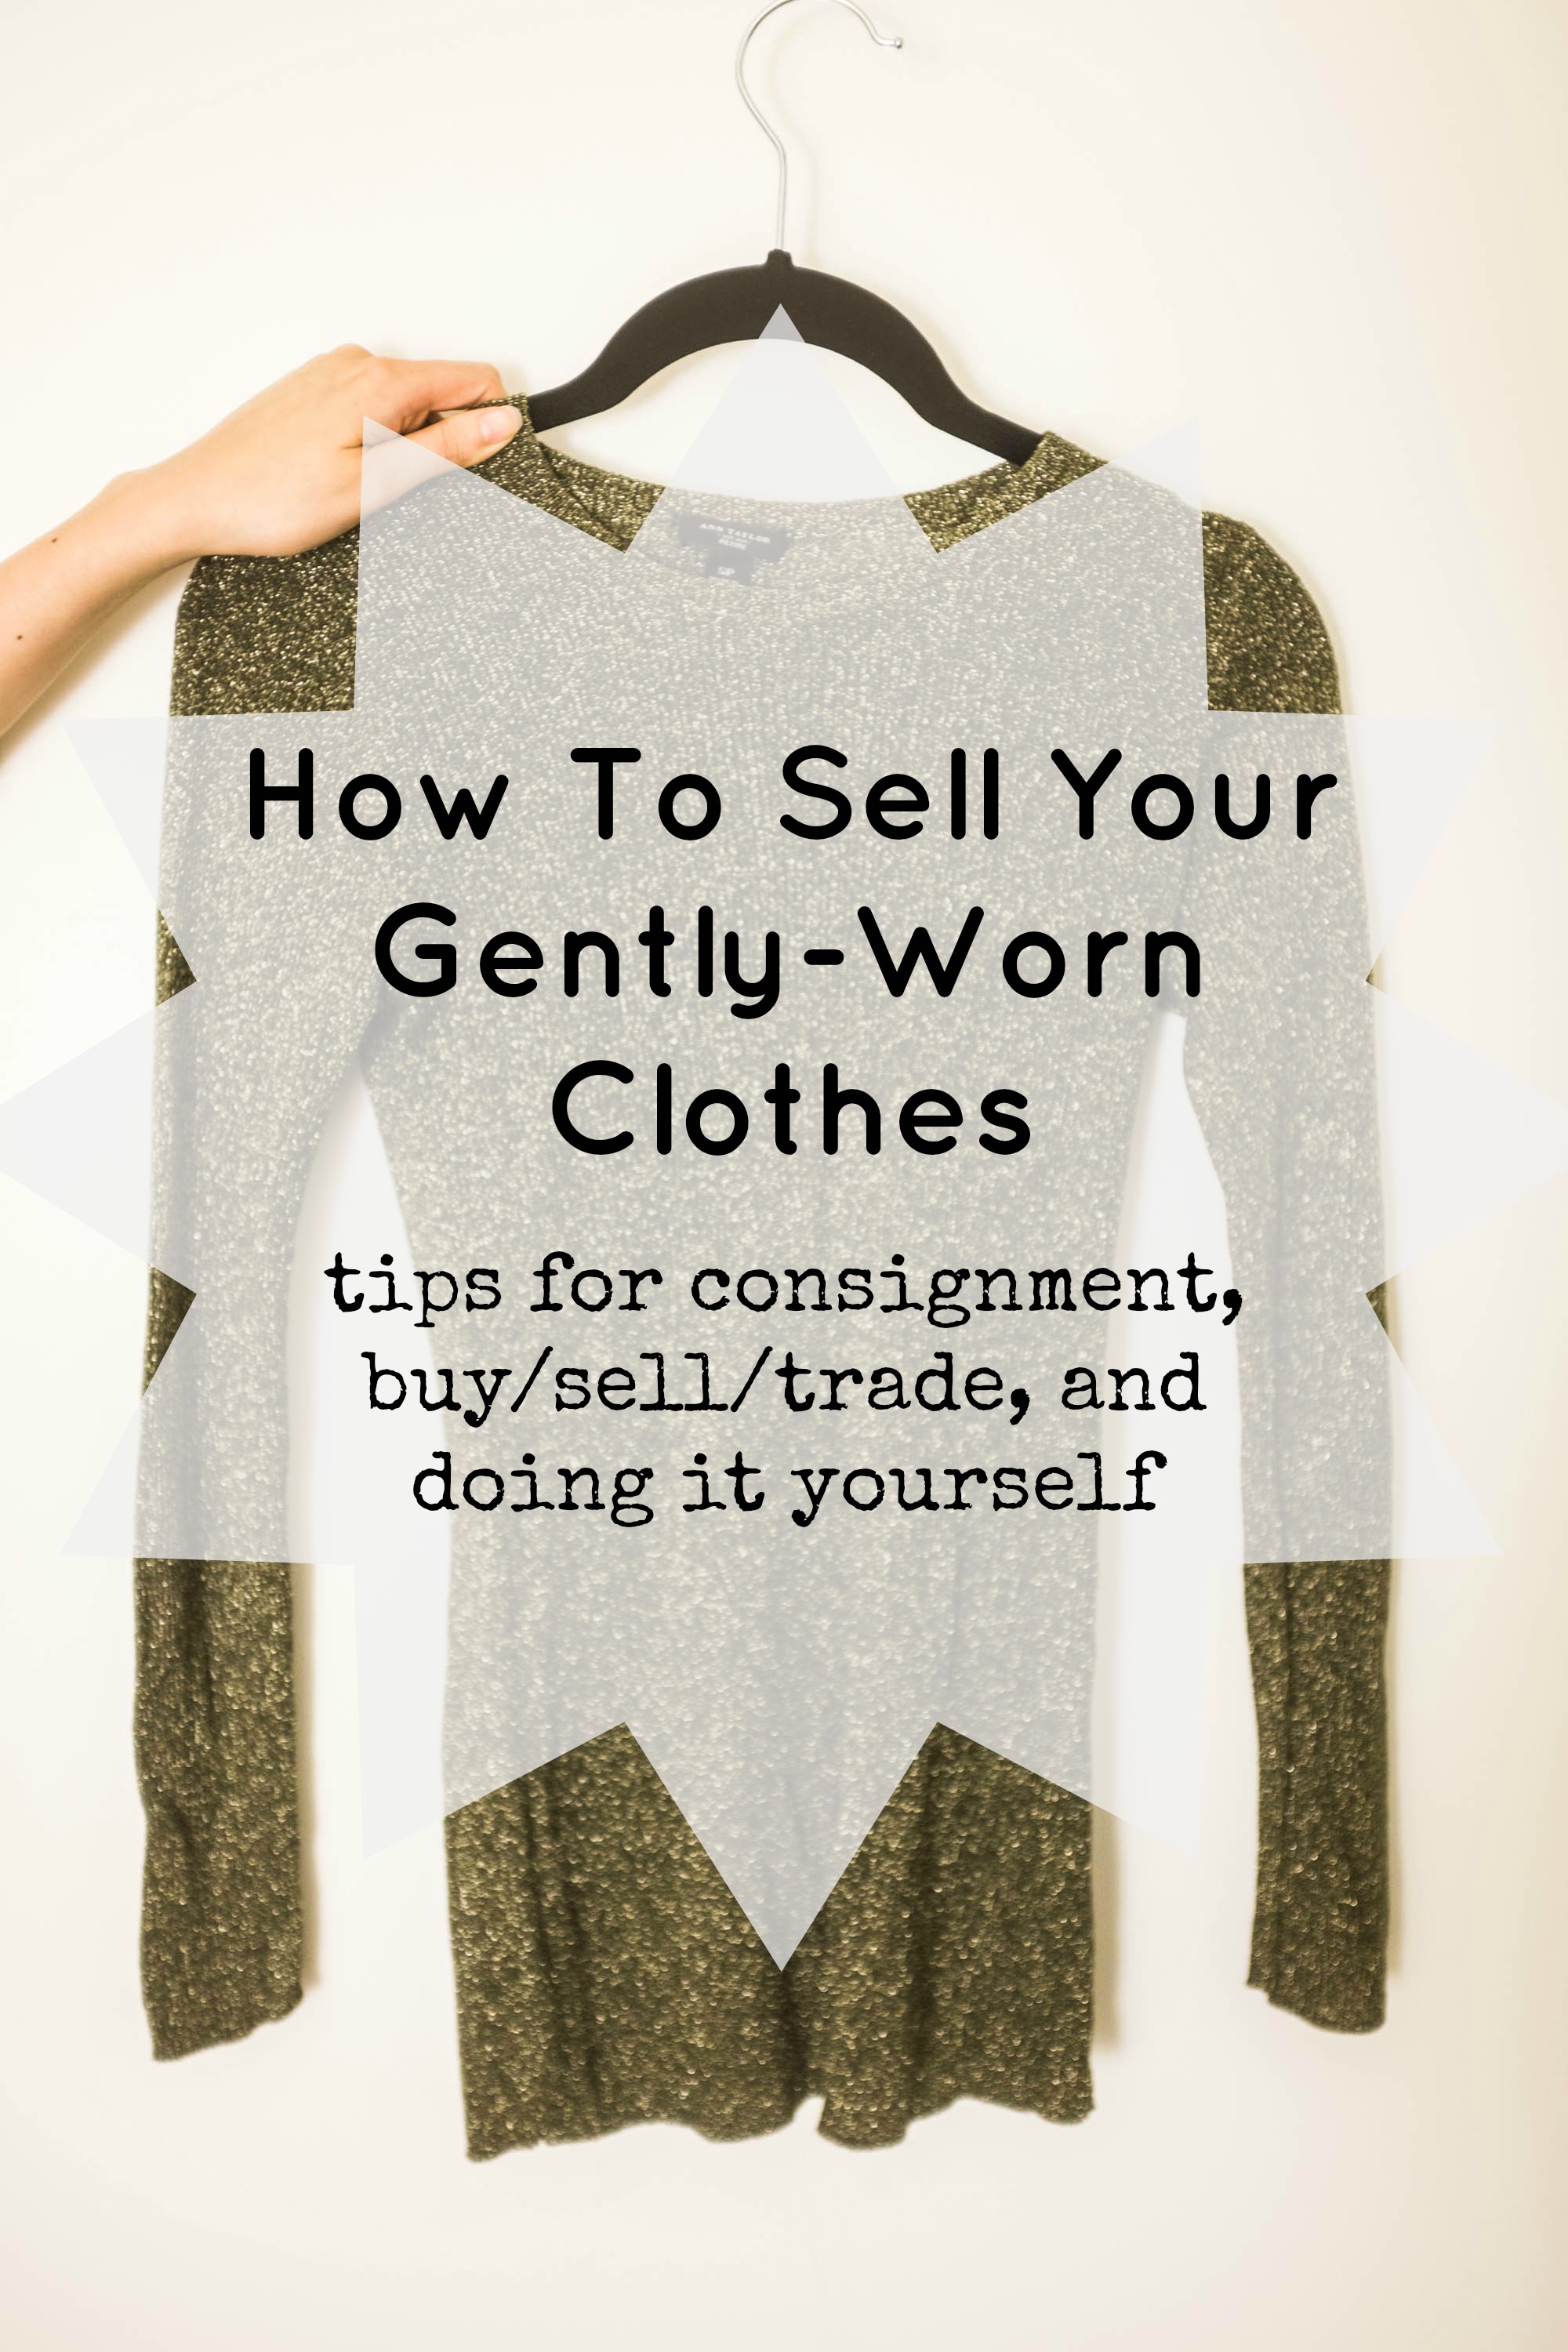 6 Places to Sell Your Used Clothes for Cash